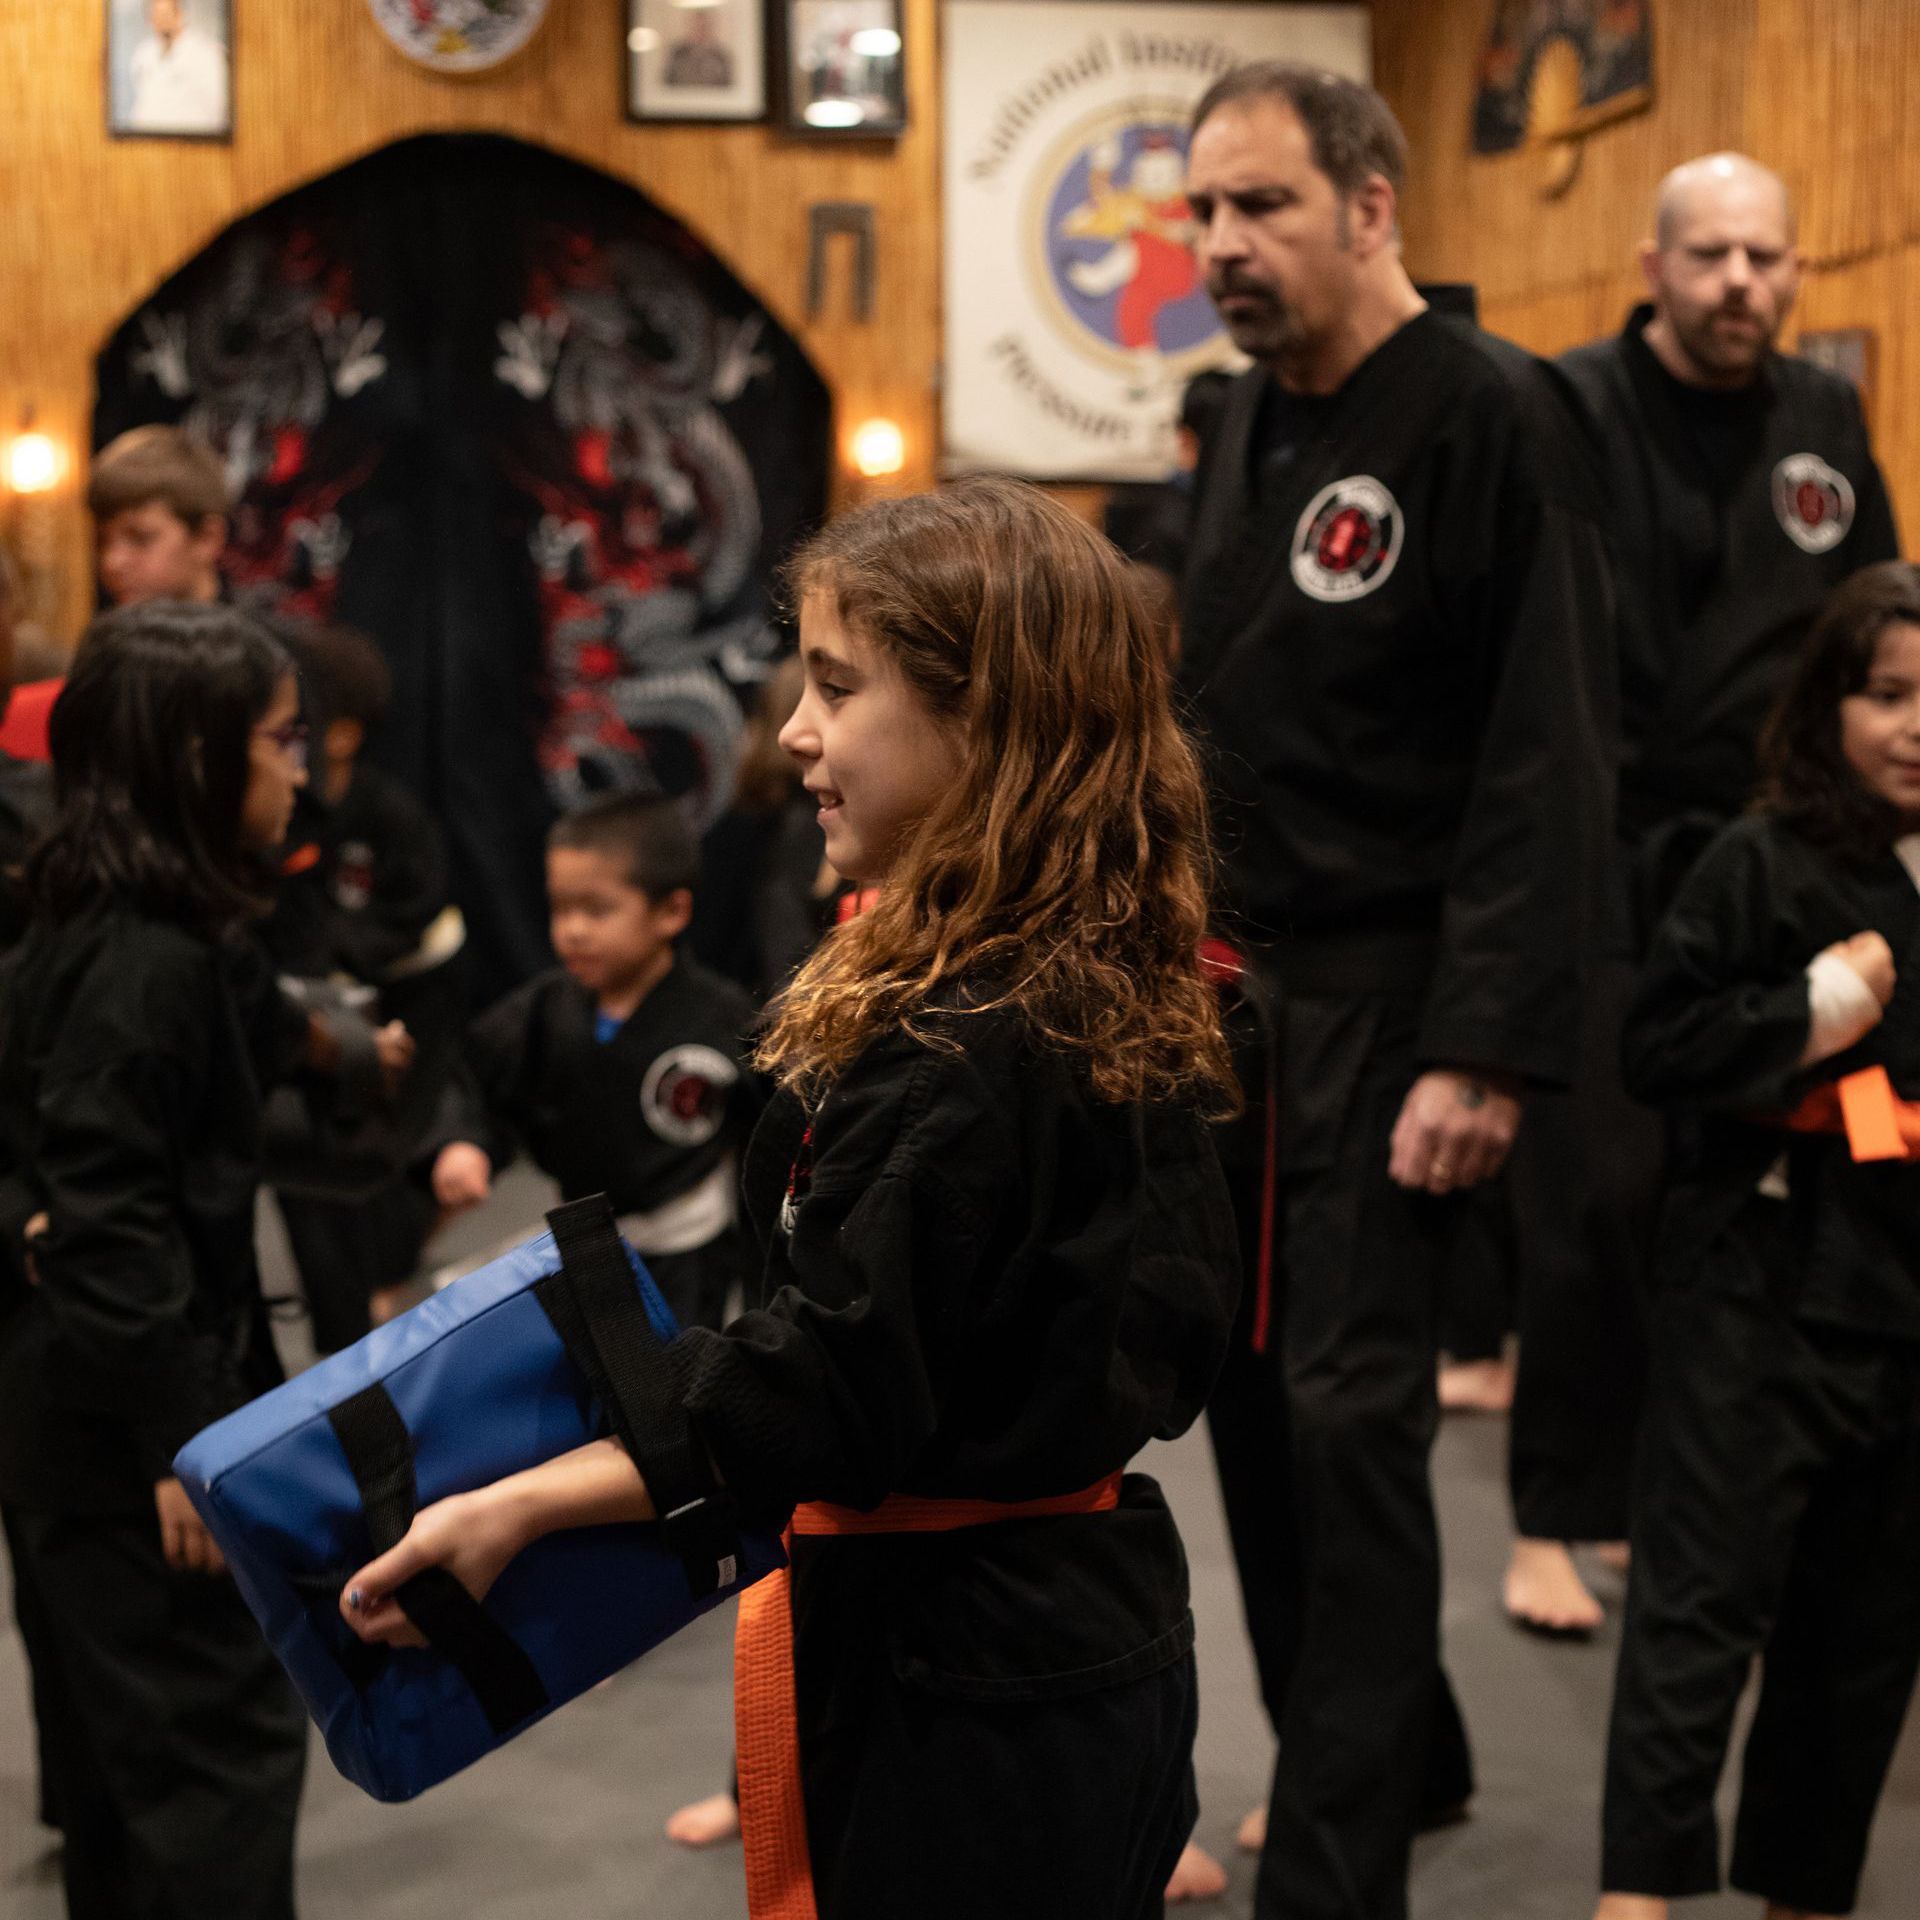 A girl in a black karate uniform is holding a blue bag